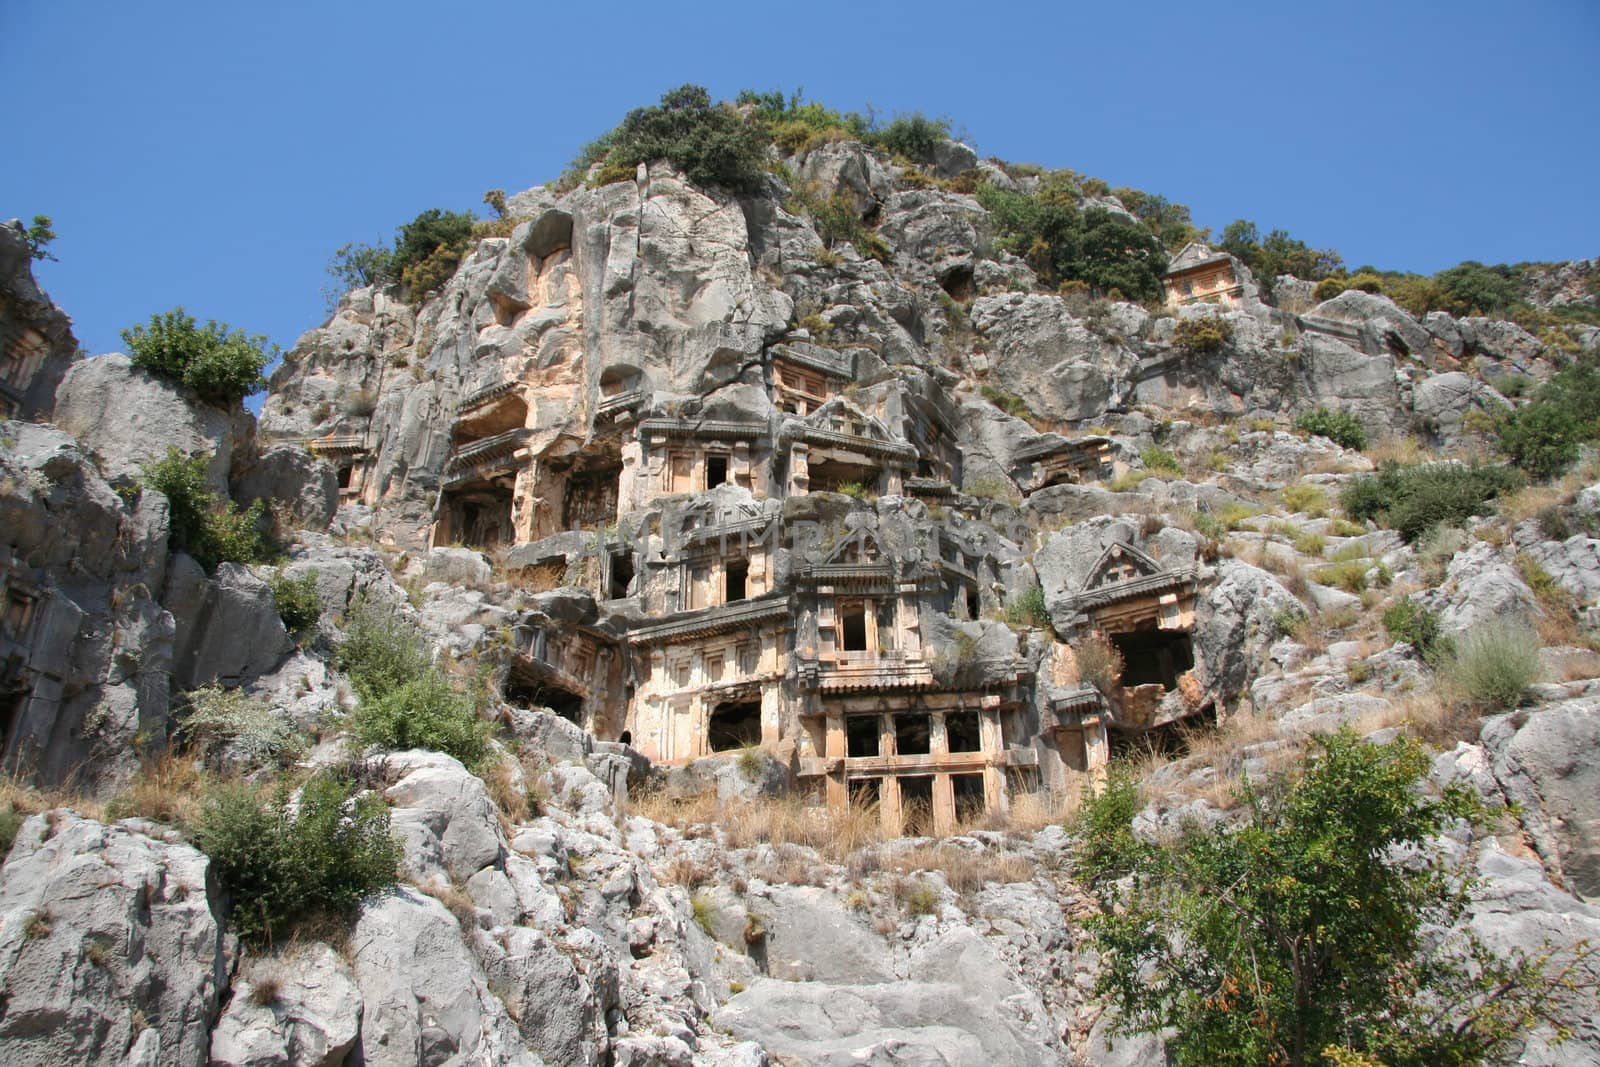  	Ancient buildings in the city of Myra